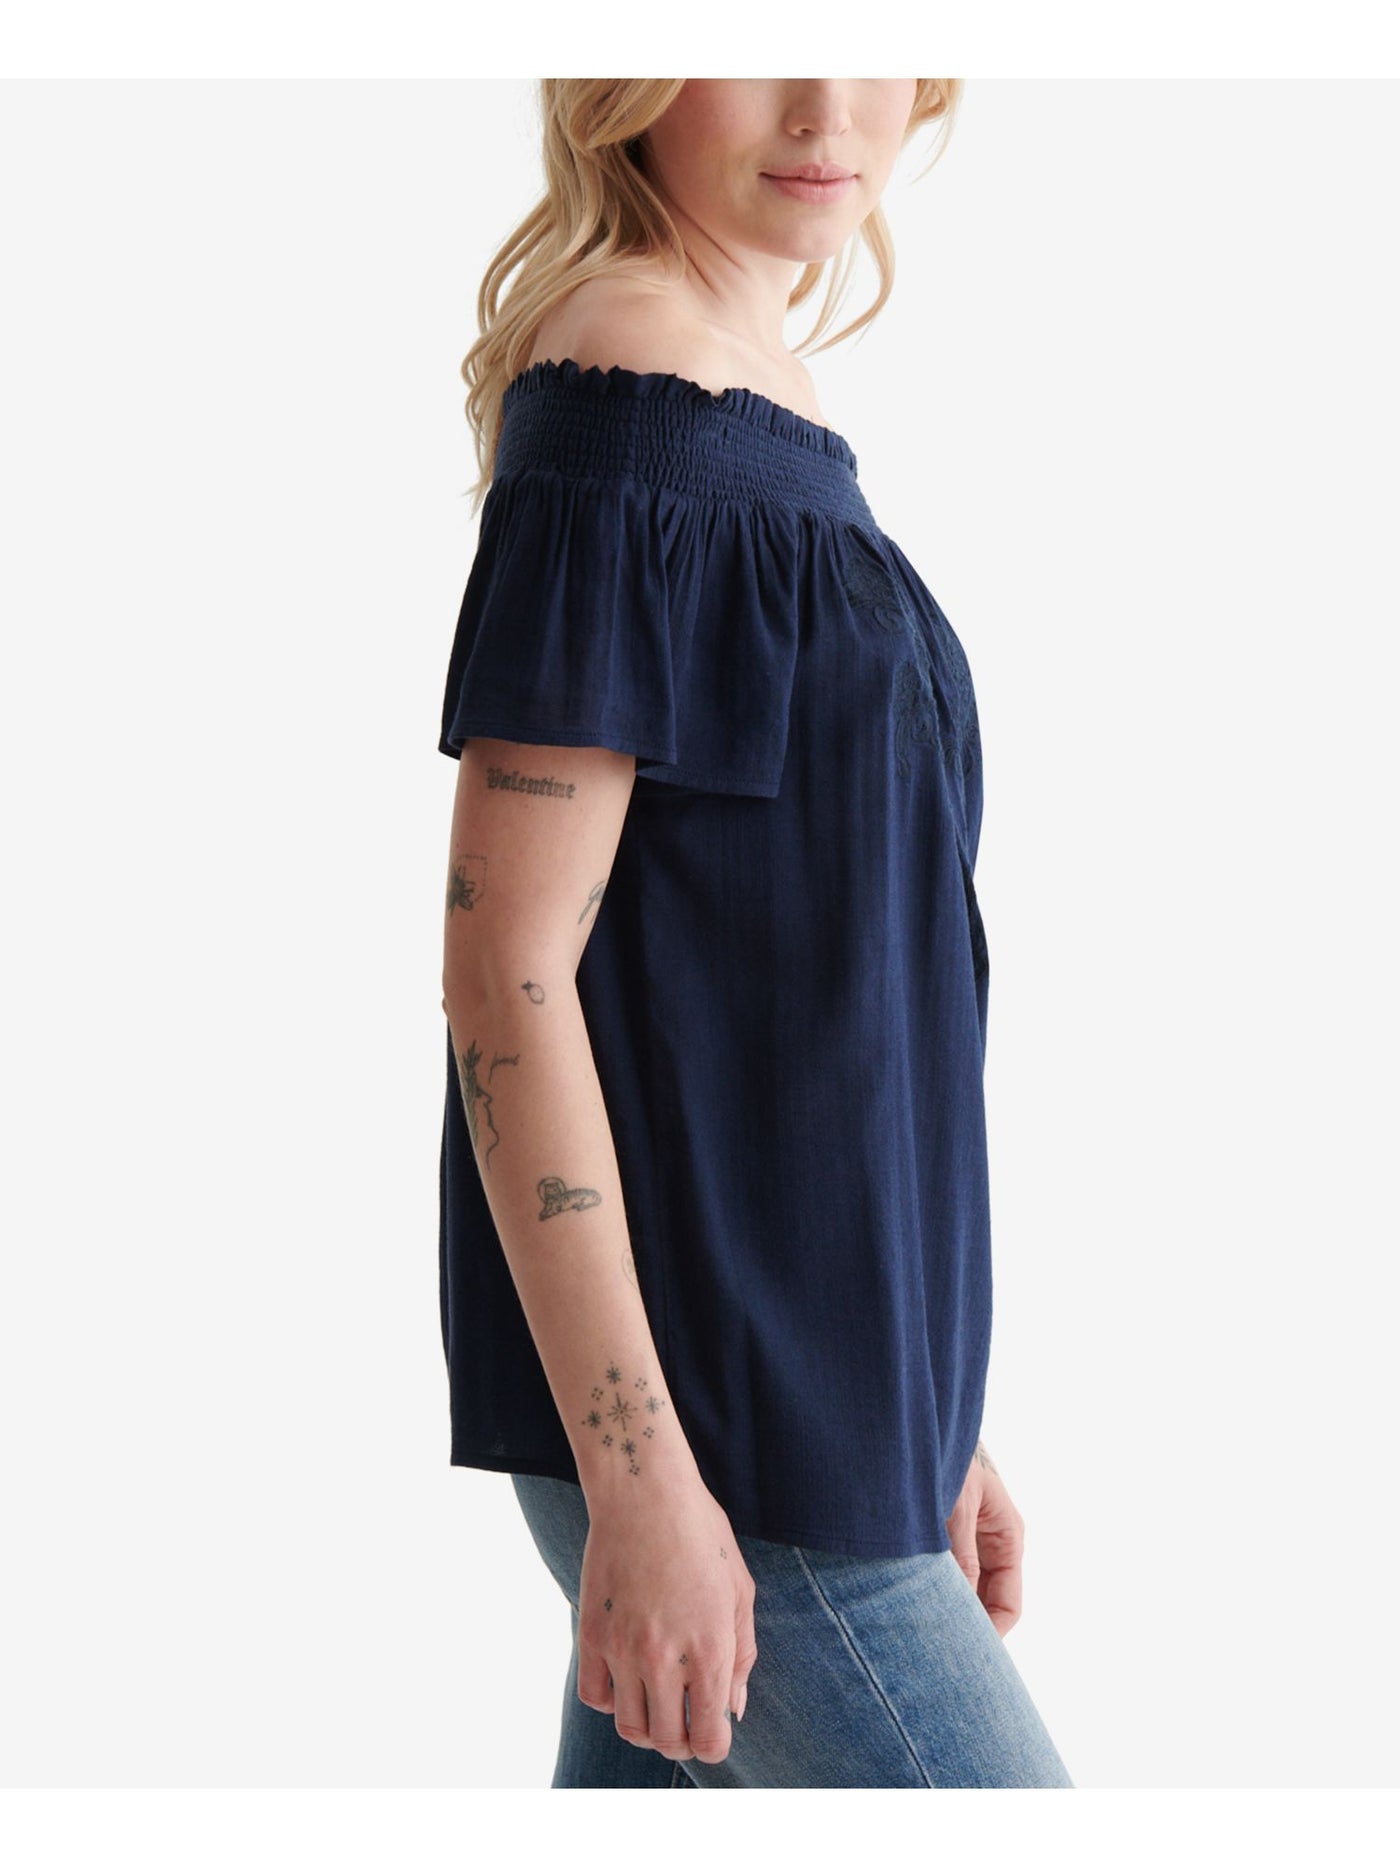 LUCKY BRAND Womens Navy Ruffled Embroidered Sheer Smocked Short Sleeve Off Shoulder Top S